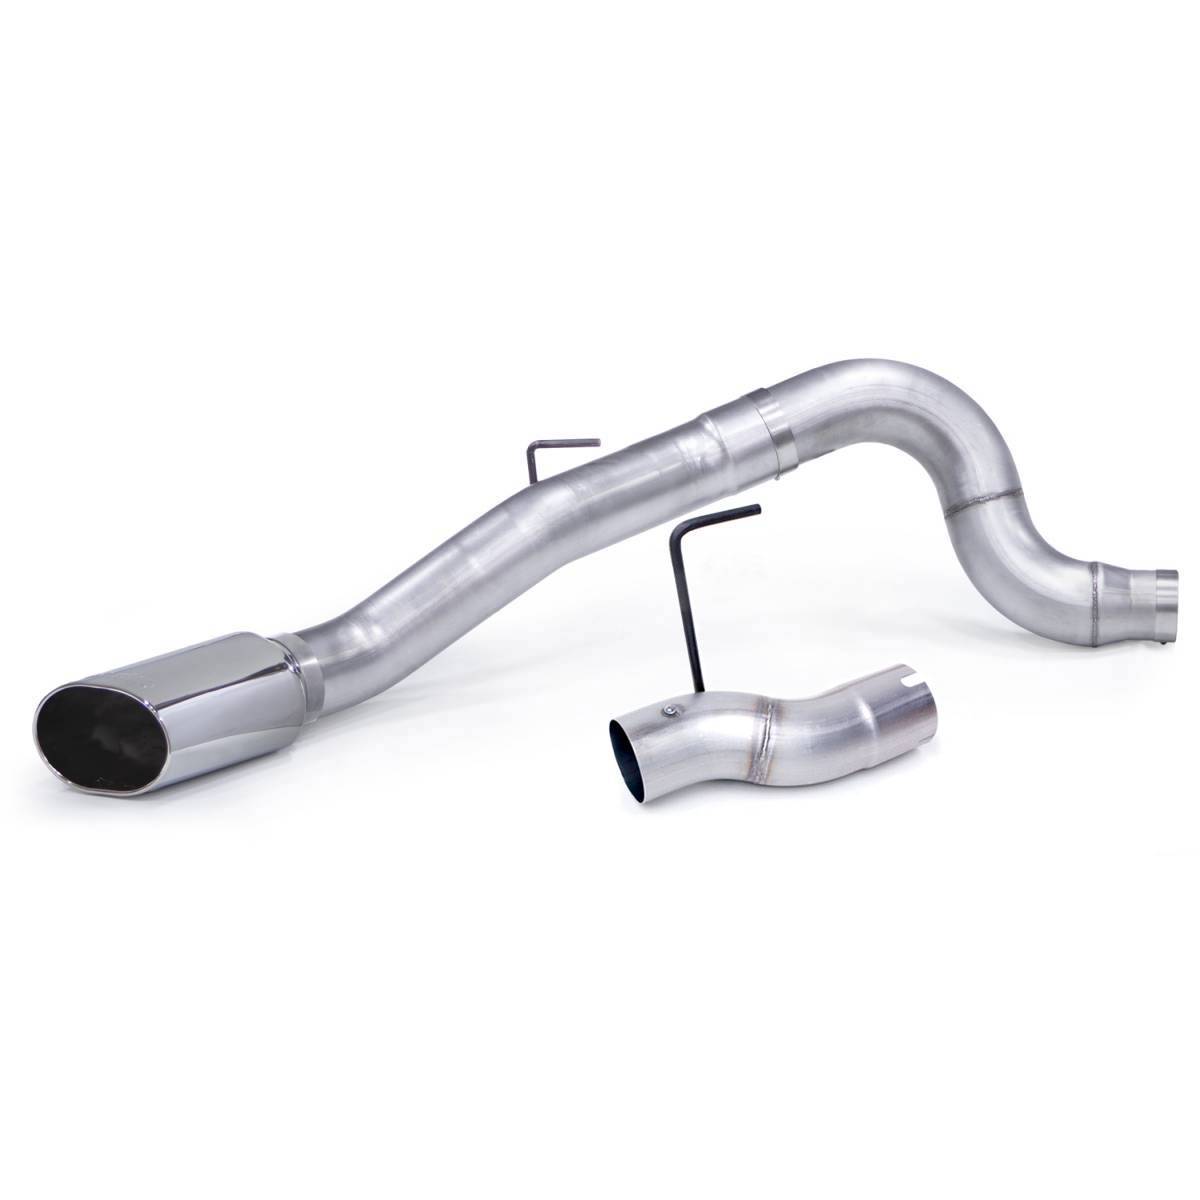 Banks Power Monster Exhaust System 5-inch Single Exit Chrome Tip for 13